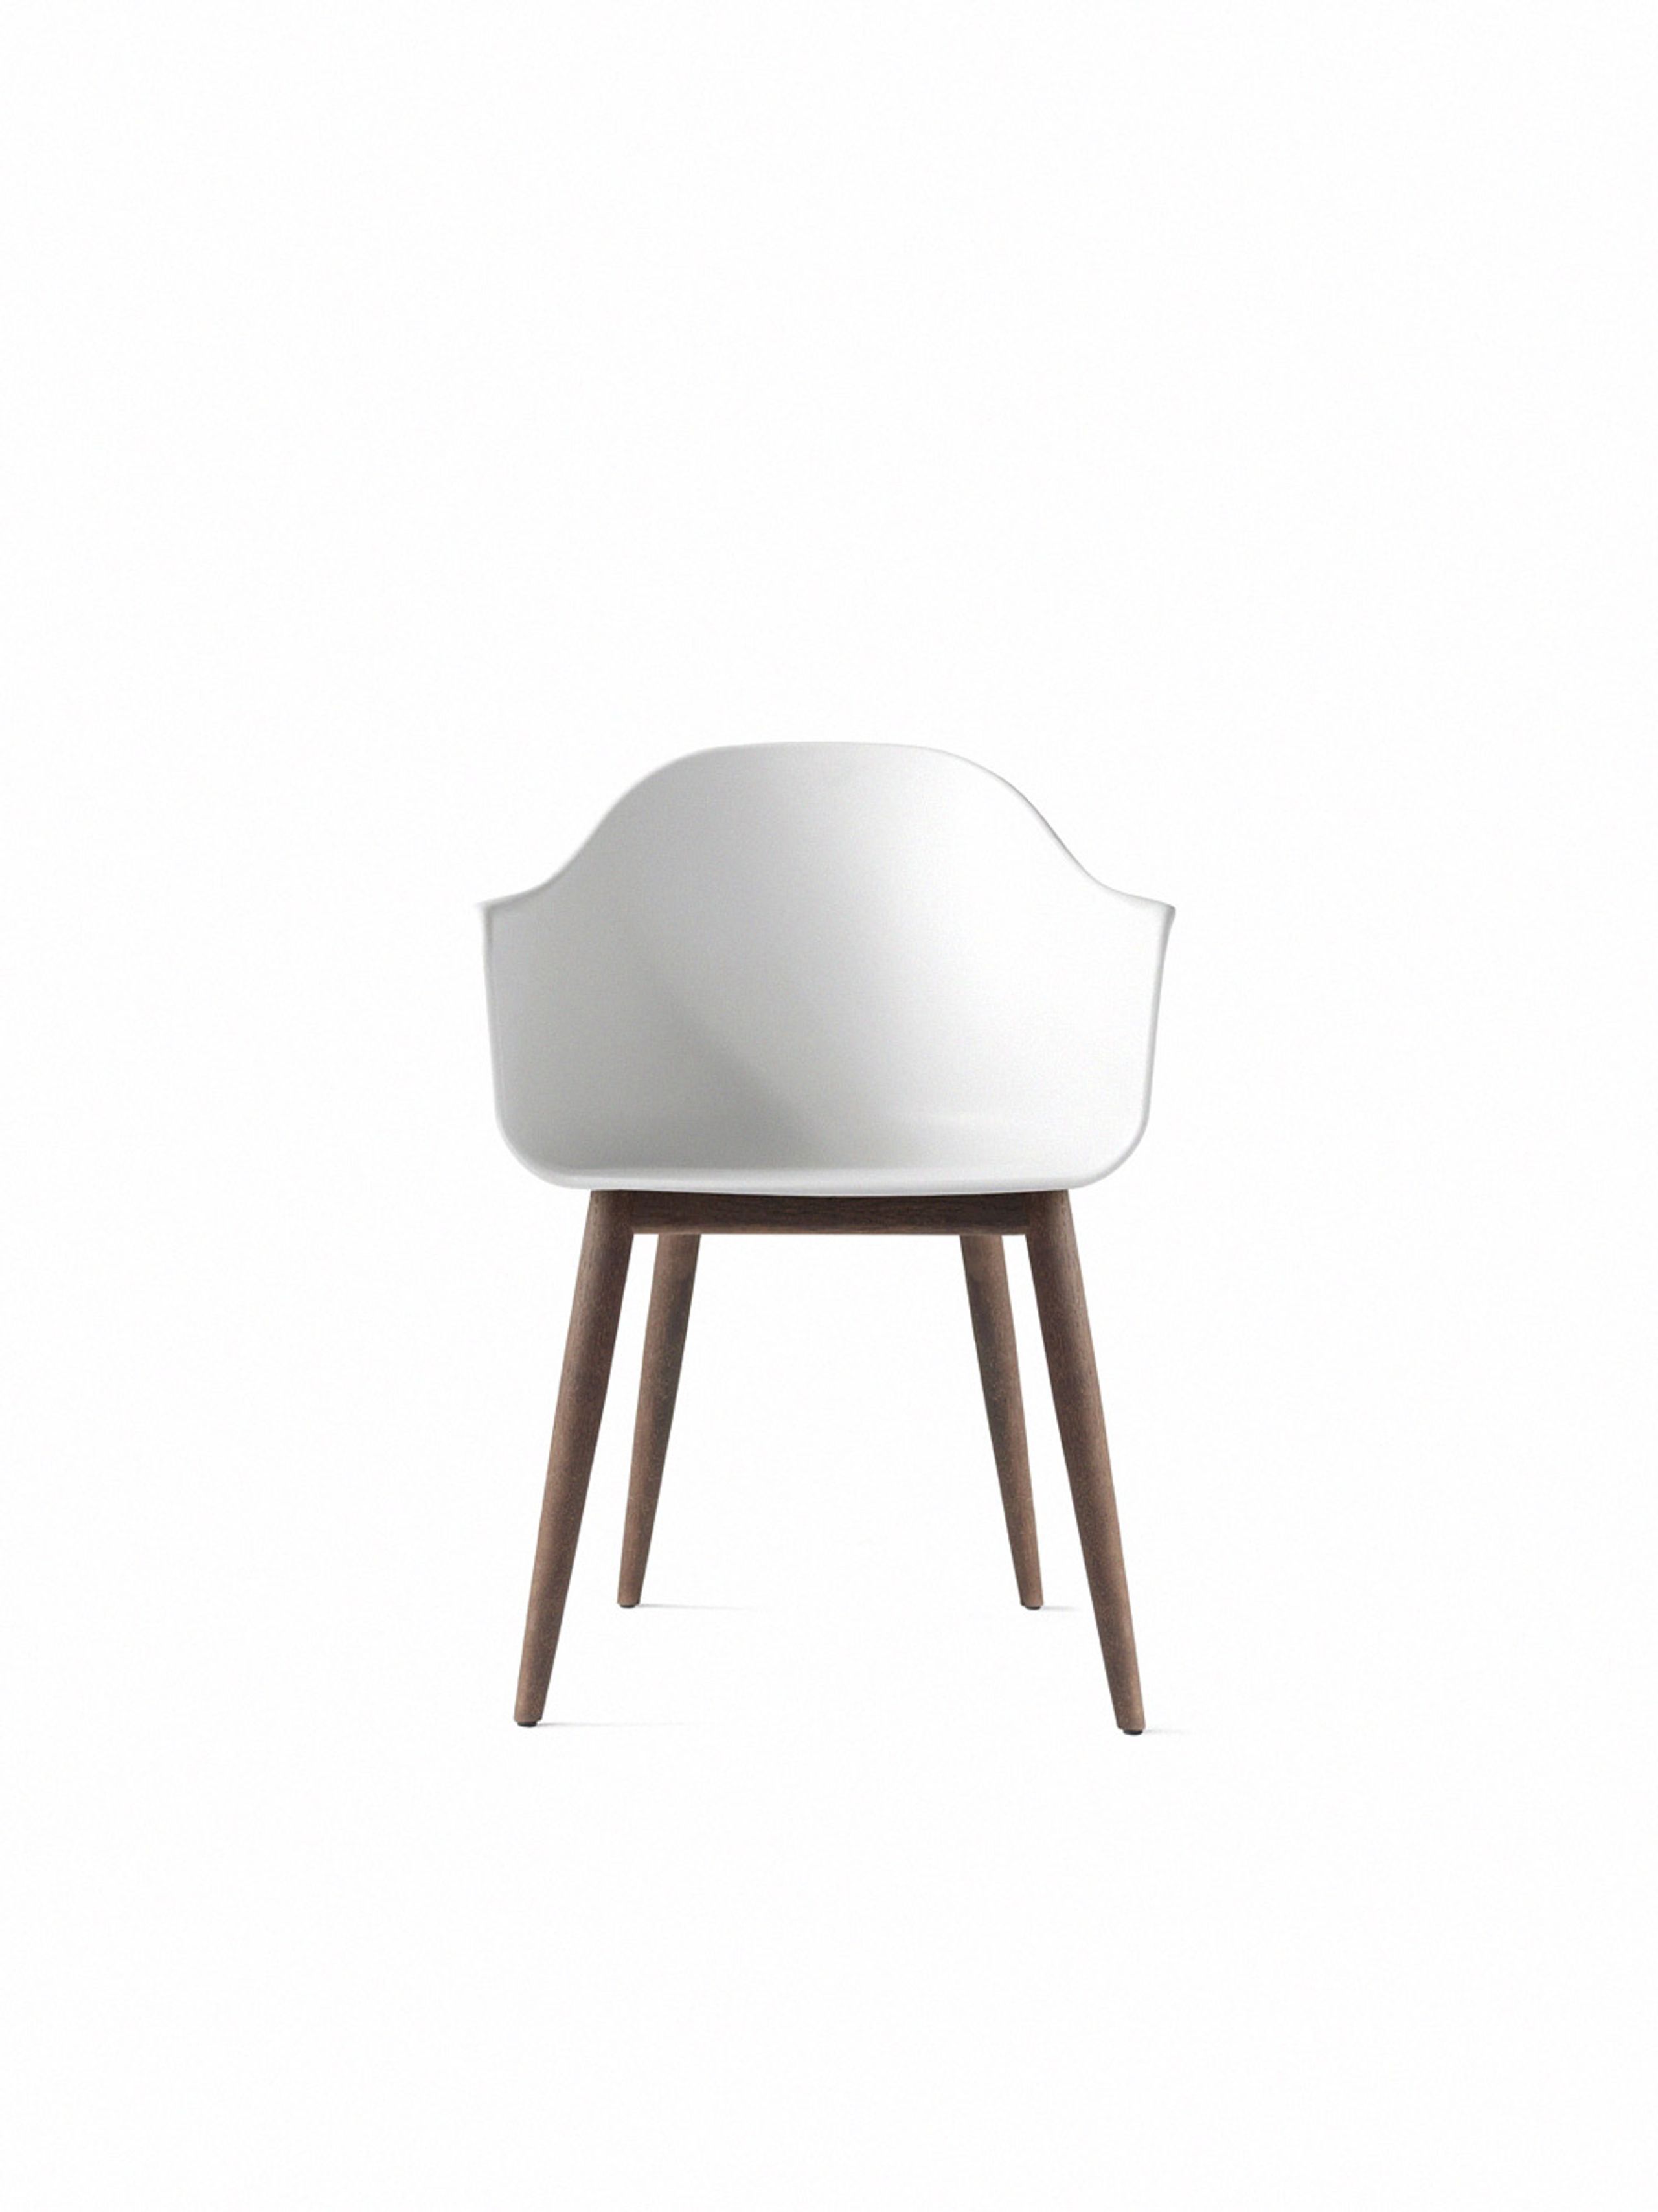 MENU - Stuhl - Harbour Dining Chair / Dark Stained Oak Base - White